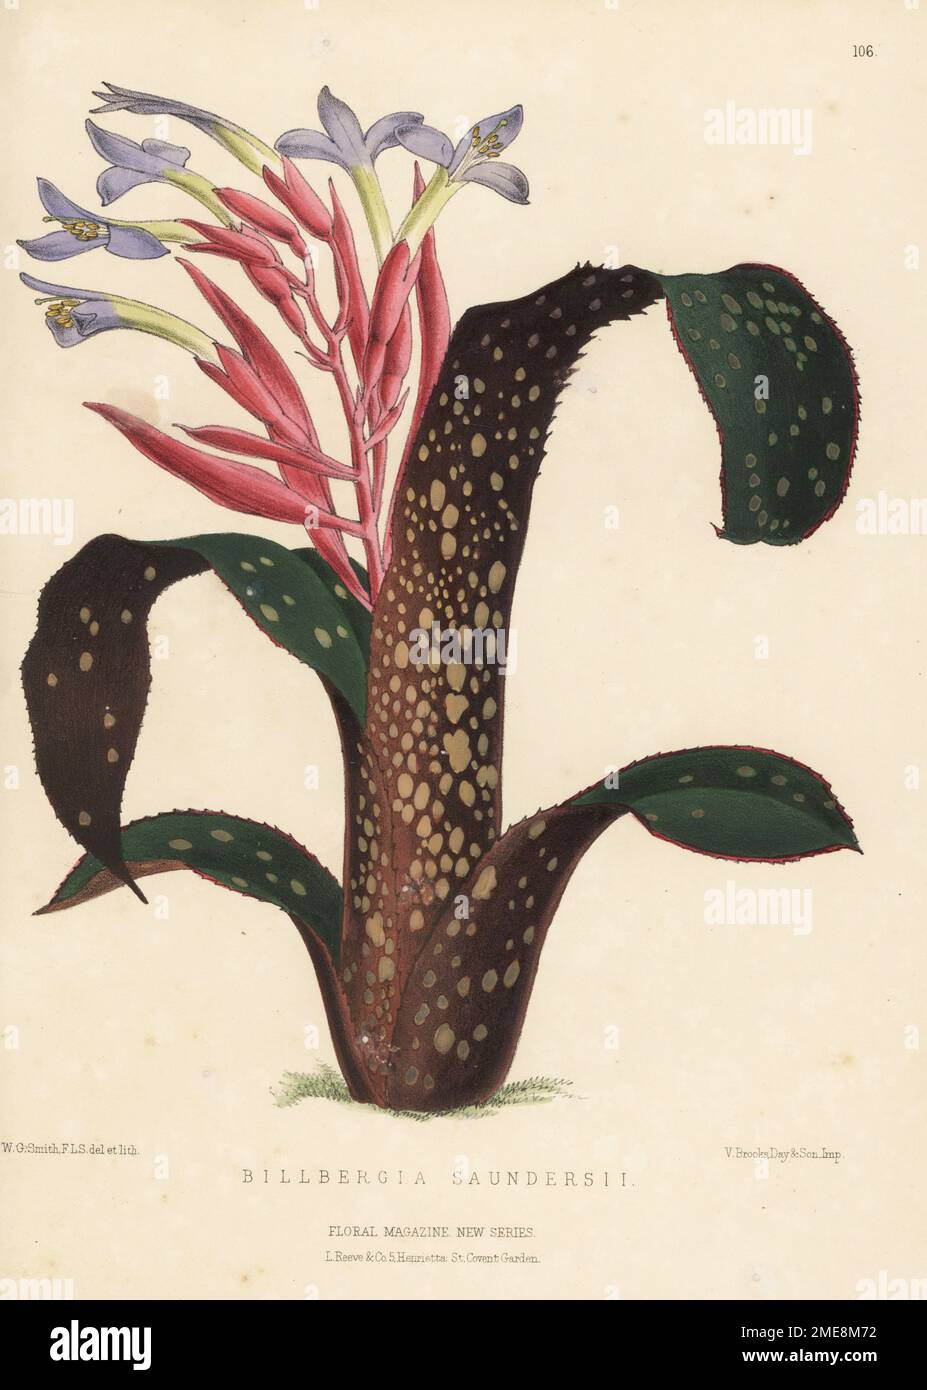 Billbergia saundersii, bromeliad native to Brazil, named for the Swedish botanist Gustav Johan Billberg. Imported by nurseryman William Bull, King's Road, Chelsea. Handcolored botanical illustration drawn and lithographed by Worthington George Smith from Henry Honywood Dombrain's Floral Magazine, New Series, Volume 3, L. Reeve, London, 1874. Lithograph printed by Vincent Brooks, Day & Son. Stock Photo